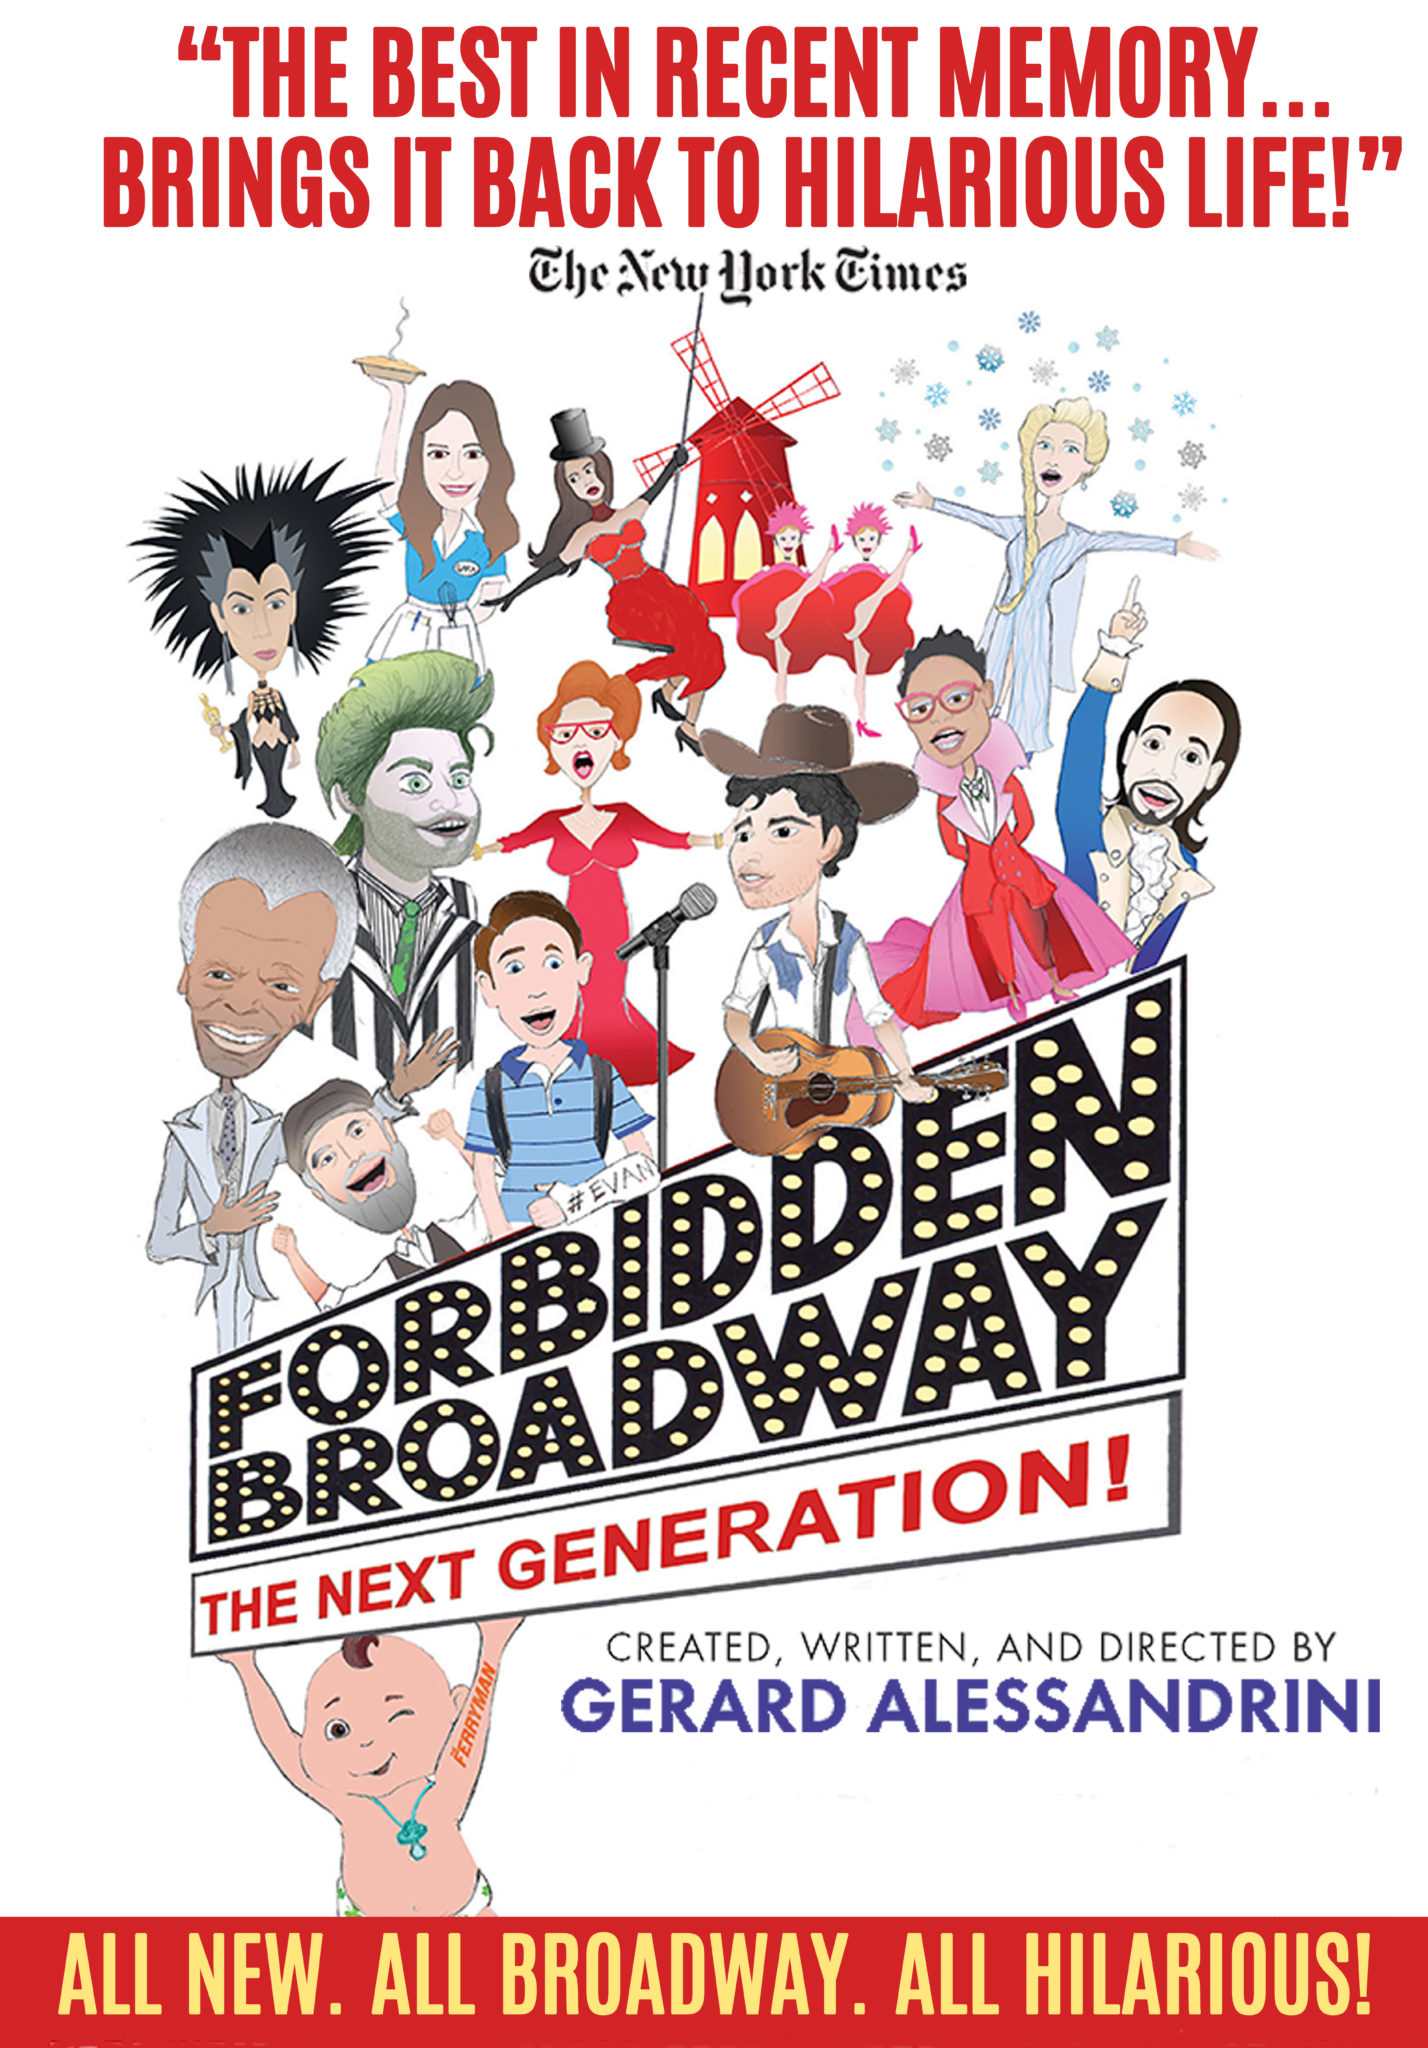 Forbidden Broadway with NY TIMES quote